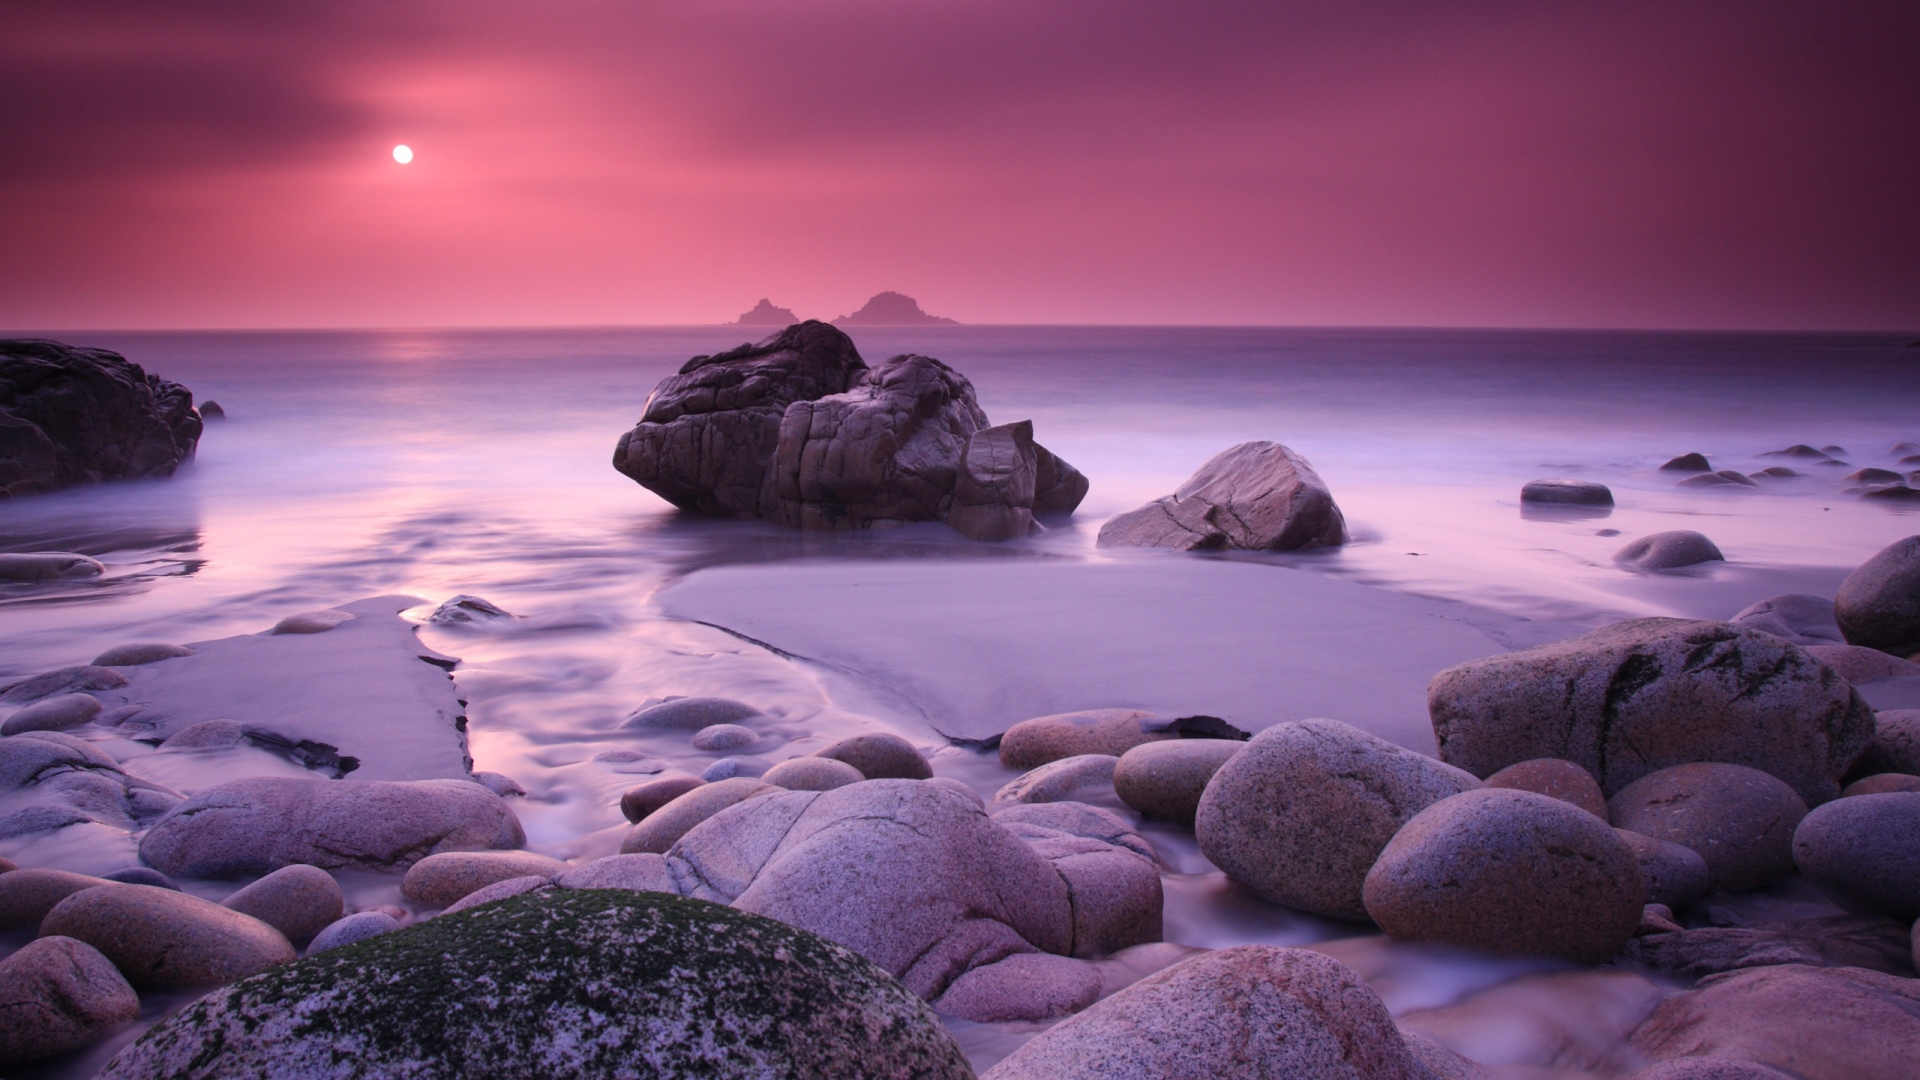 Pink Haze and Stones for 1920 x 1080 HDTV 1080p resolution